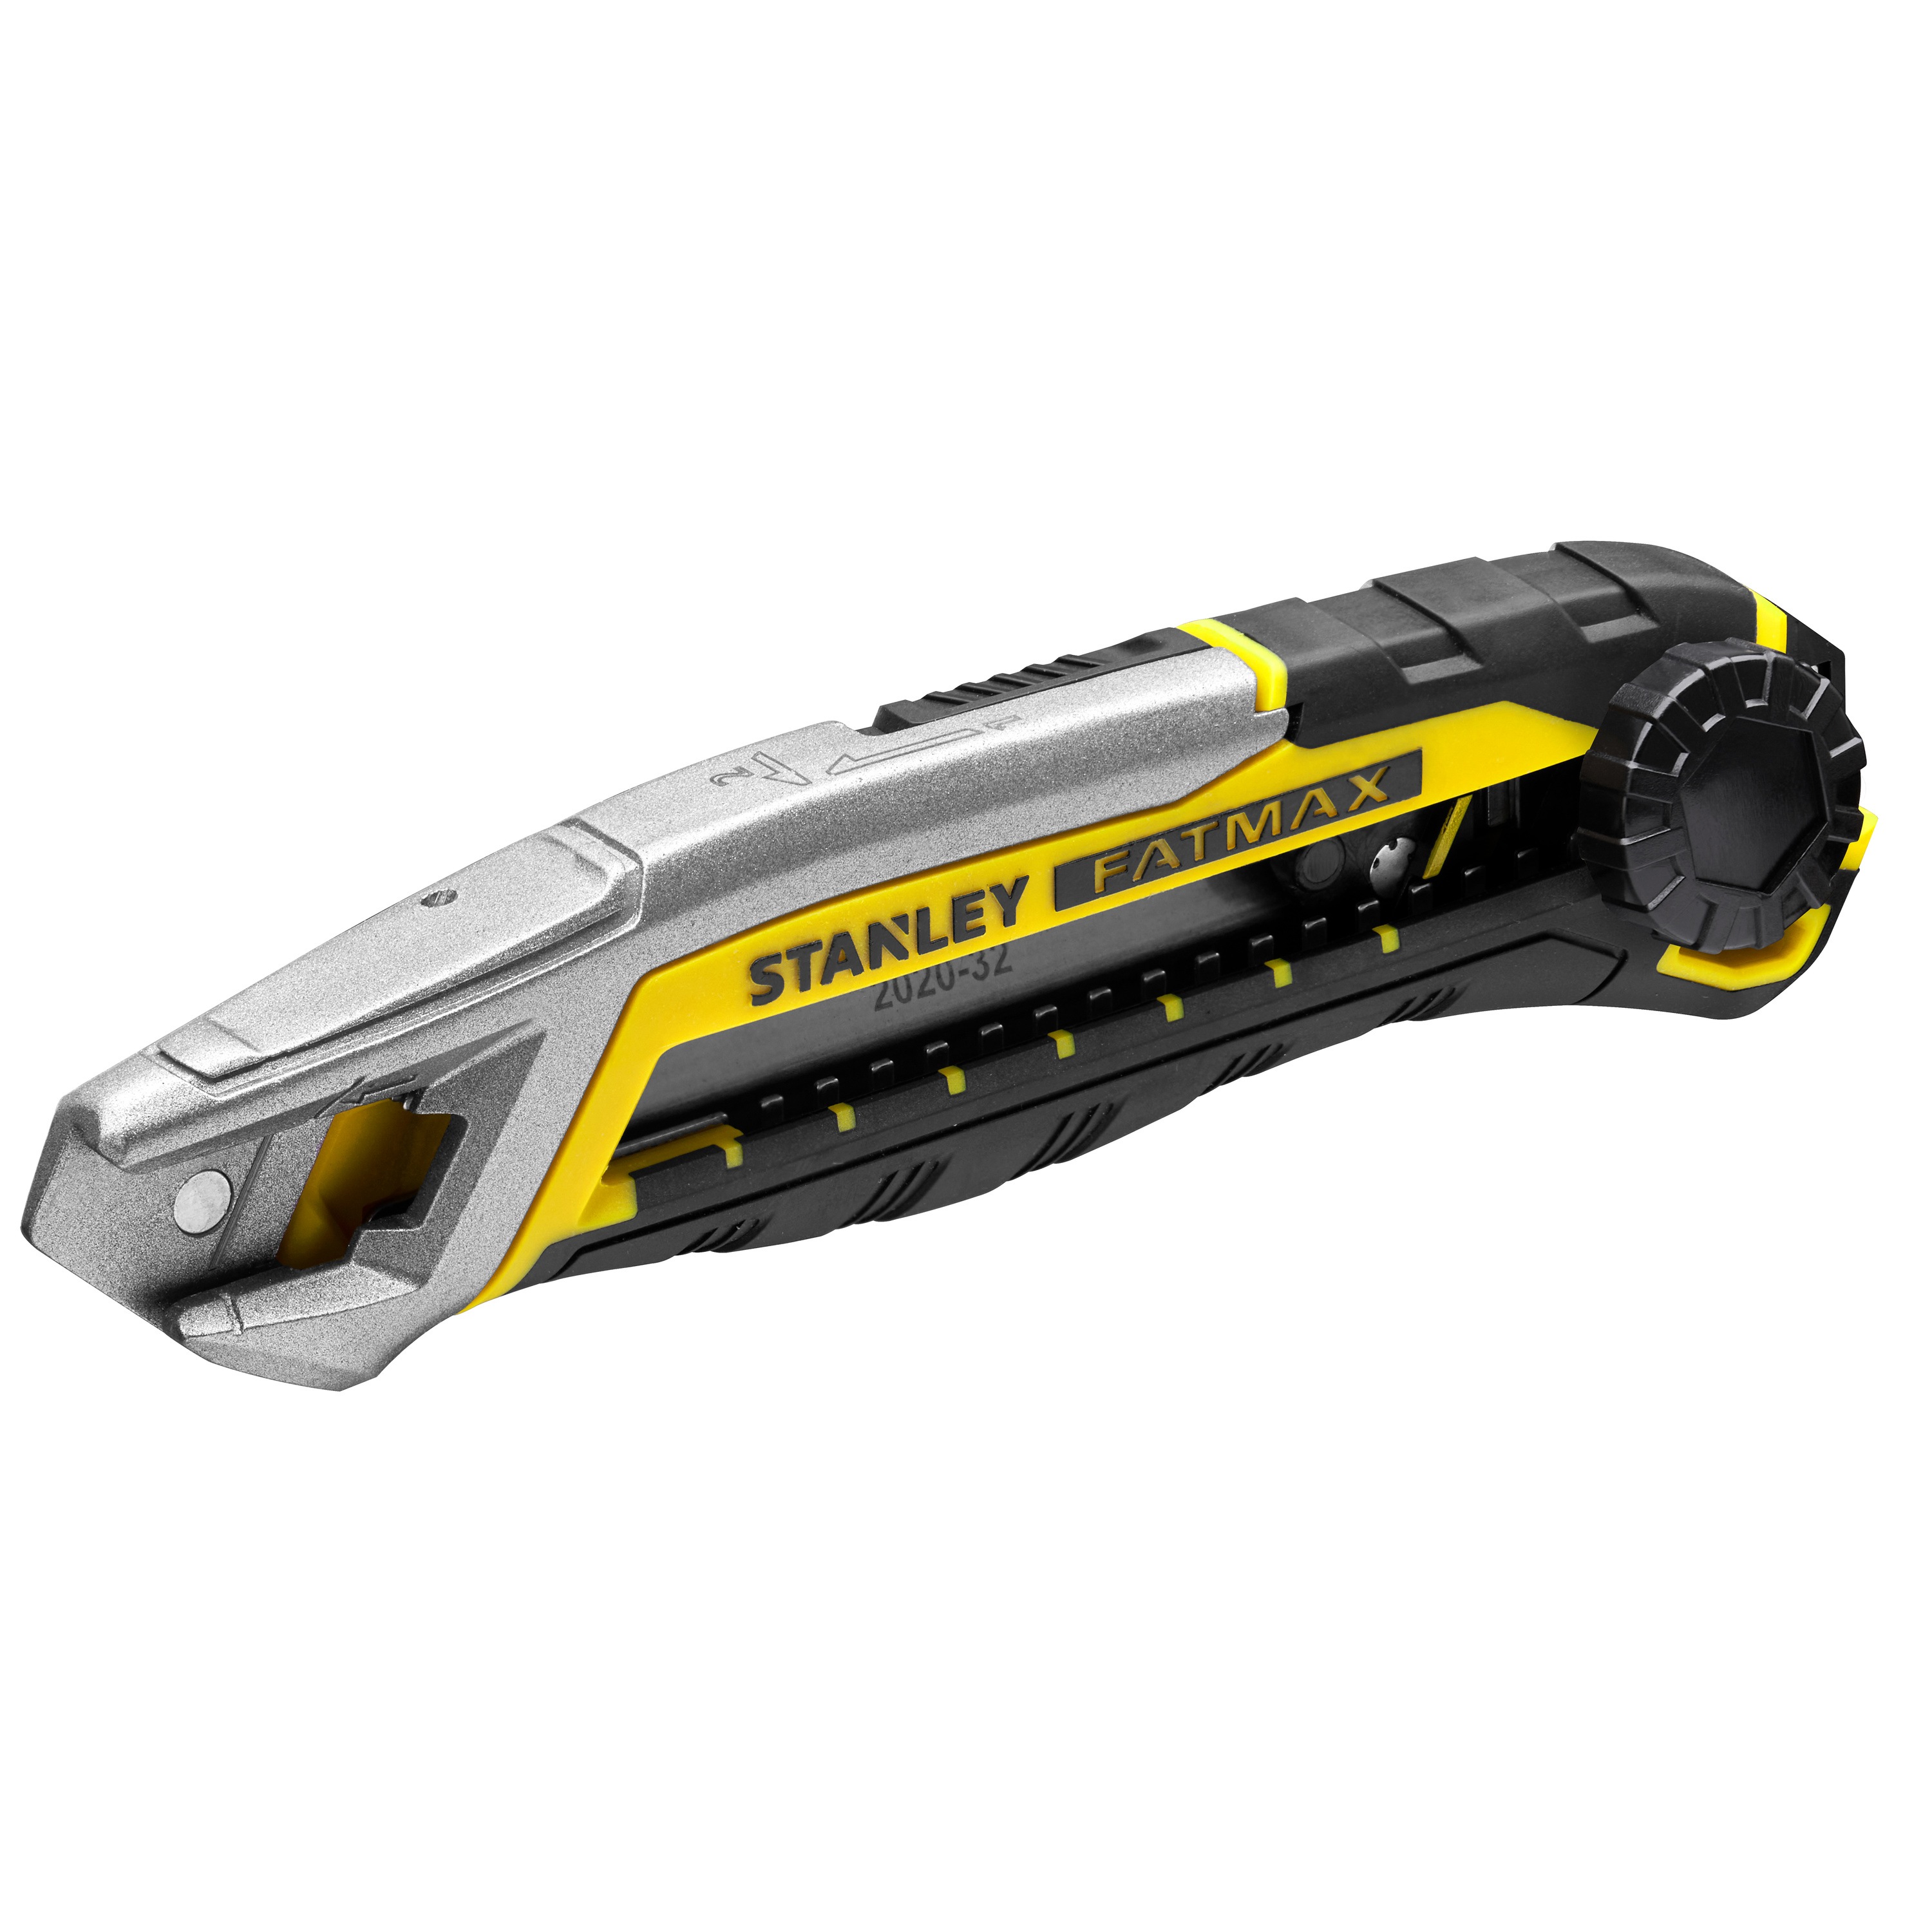 Stanley Tools - FATMAX 18 mm SnapOff Knife with Wheel Lock - FMHT10592-0